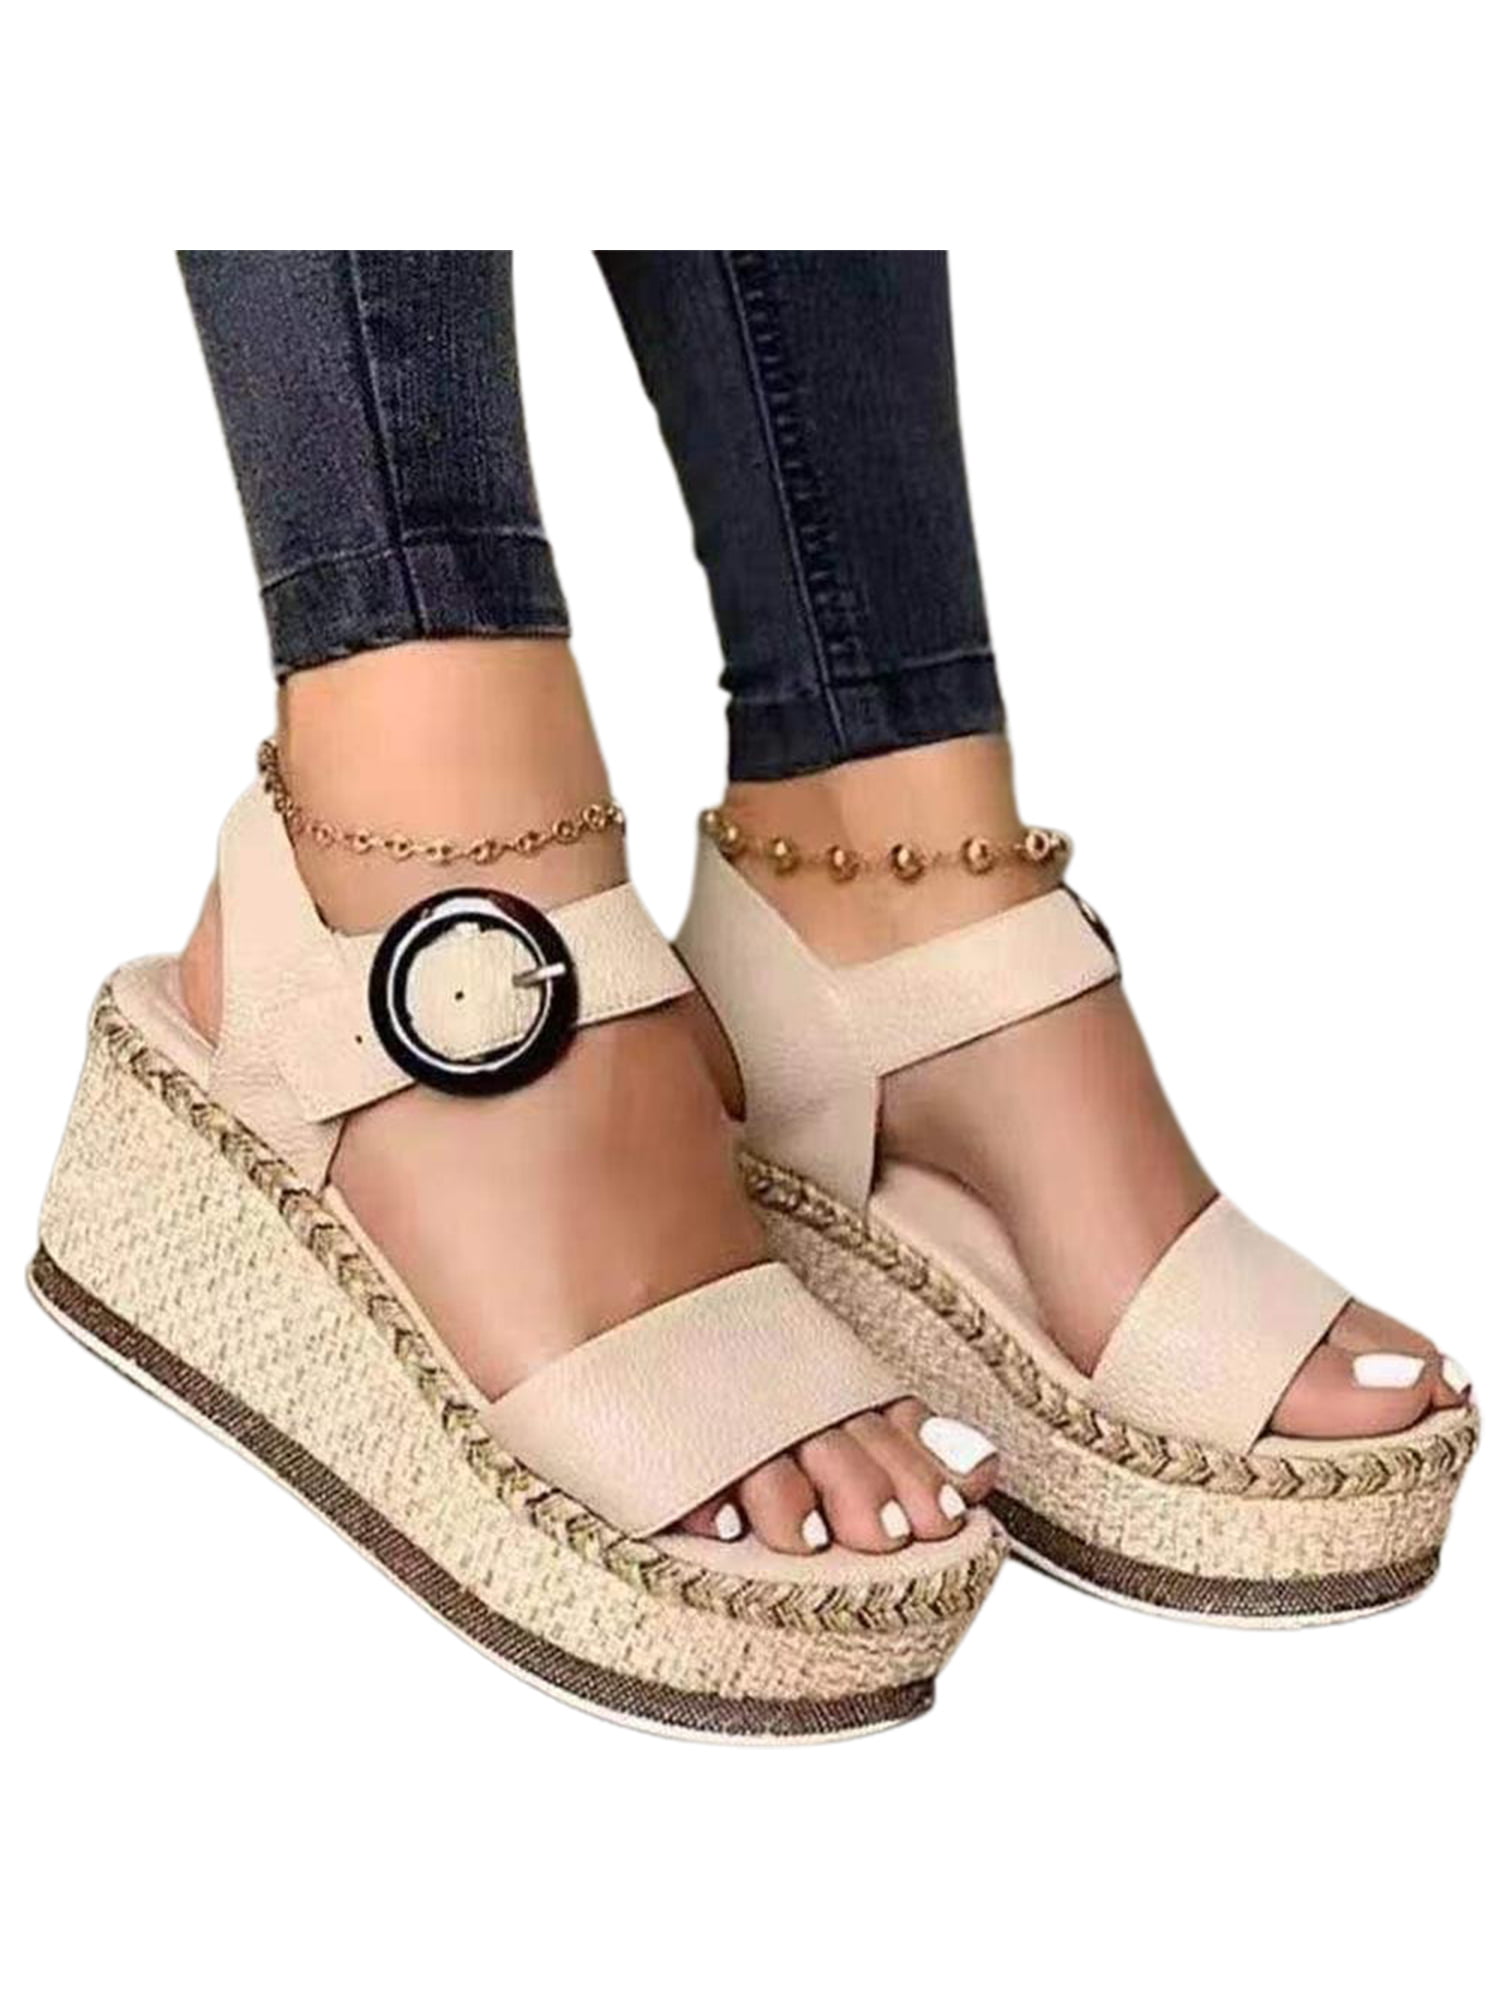 Women Fashion Summer Lace-up Straw Platform Sandals With Snake Straps Shoes HOT 